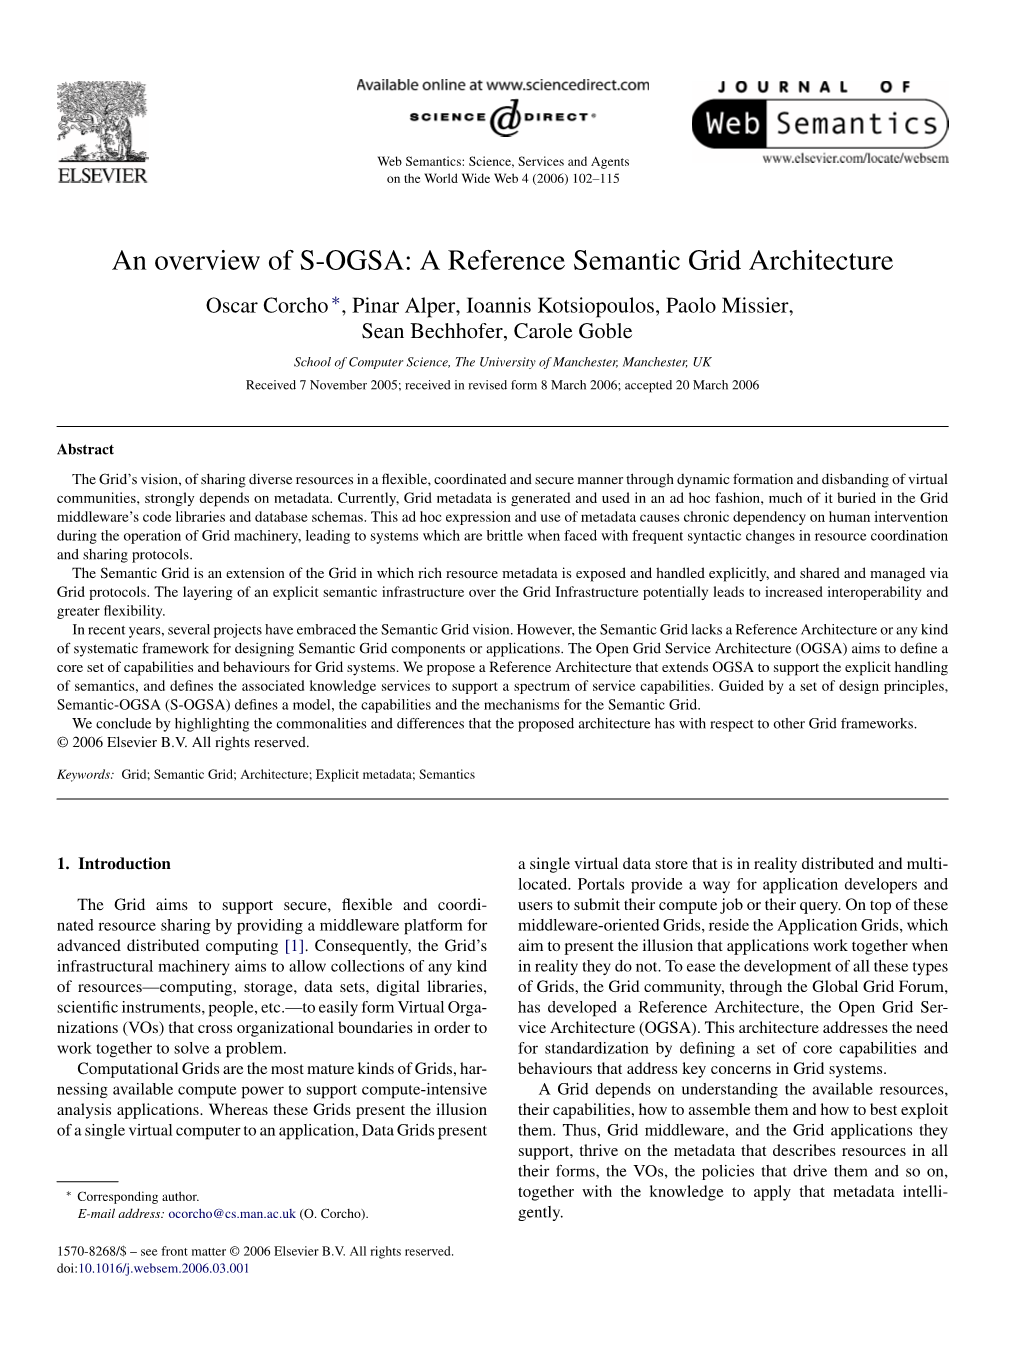 An Overview of S-OGSA: a Reference Semantic Grid Architecture